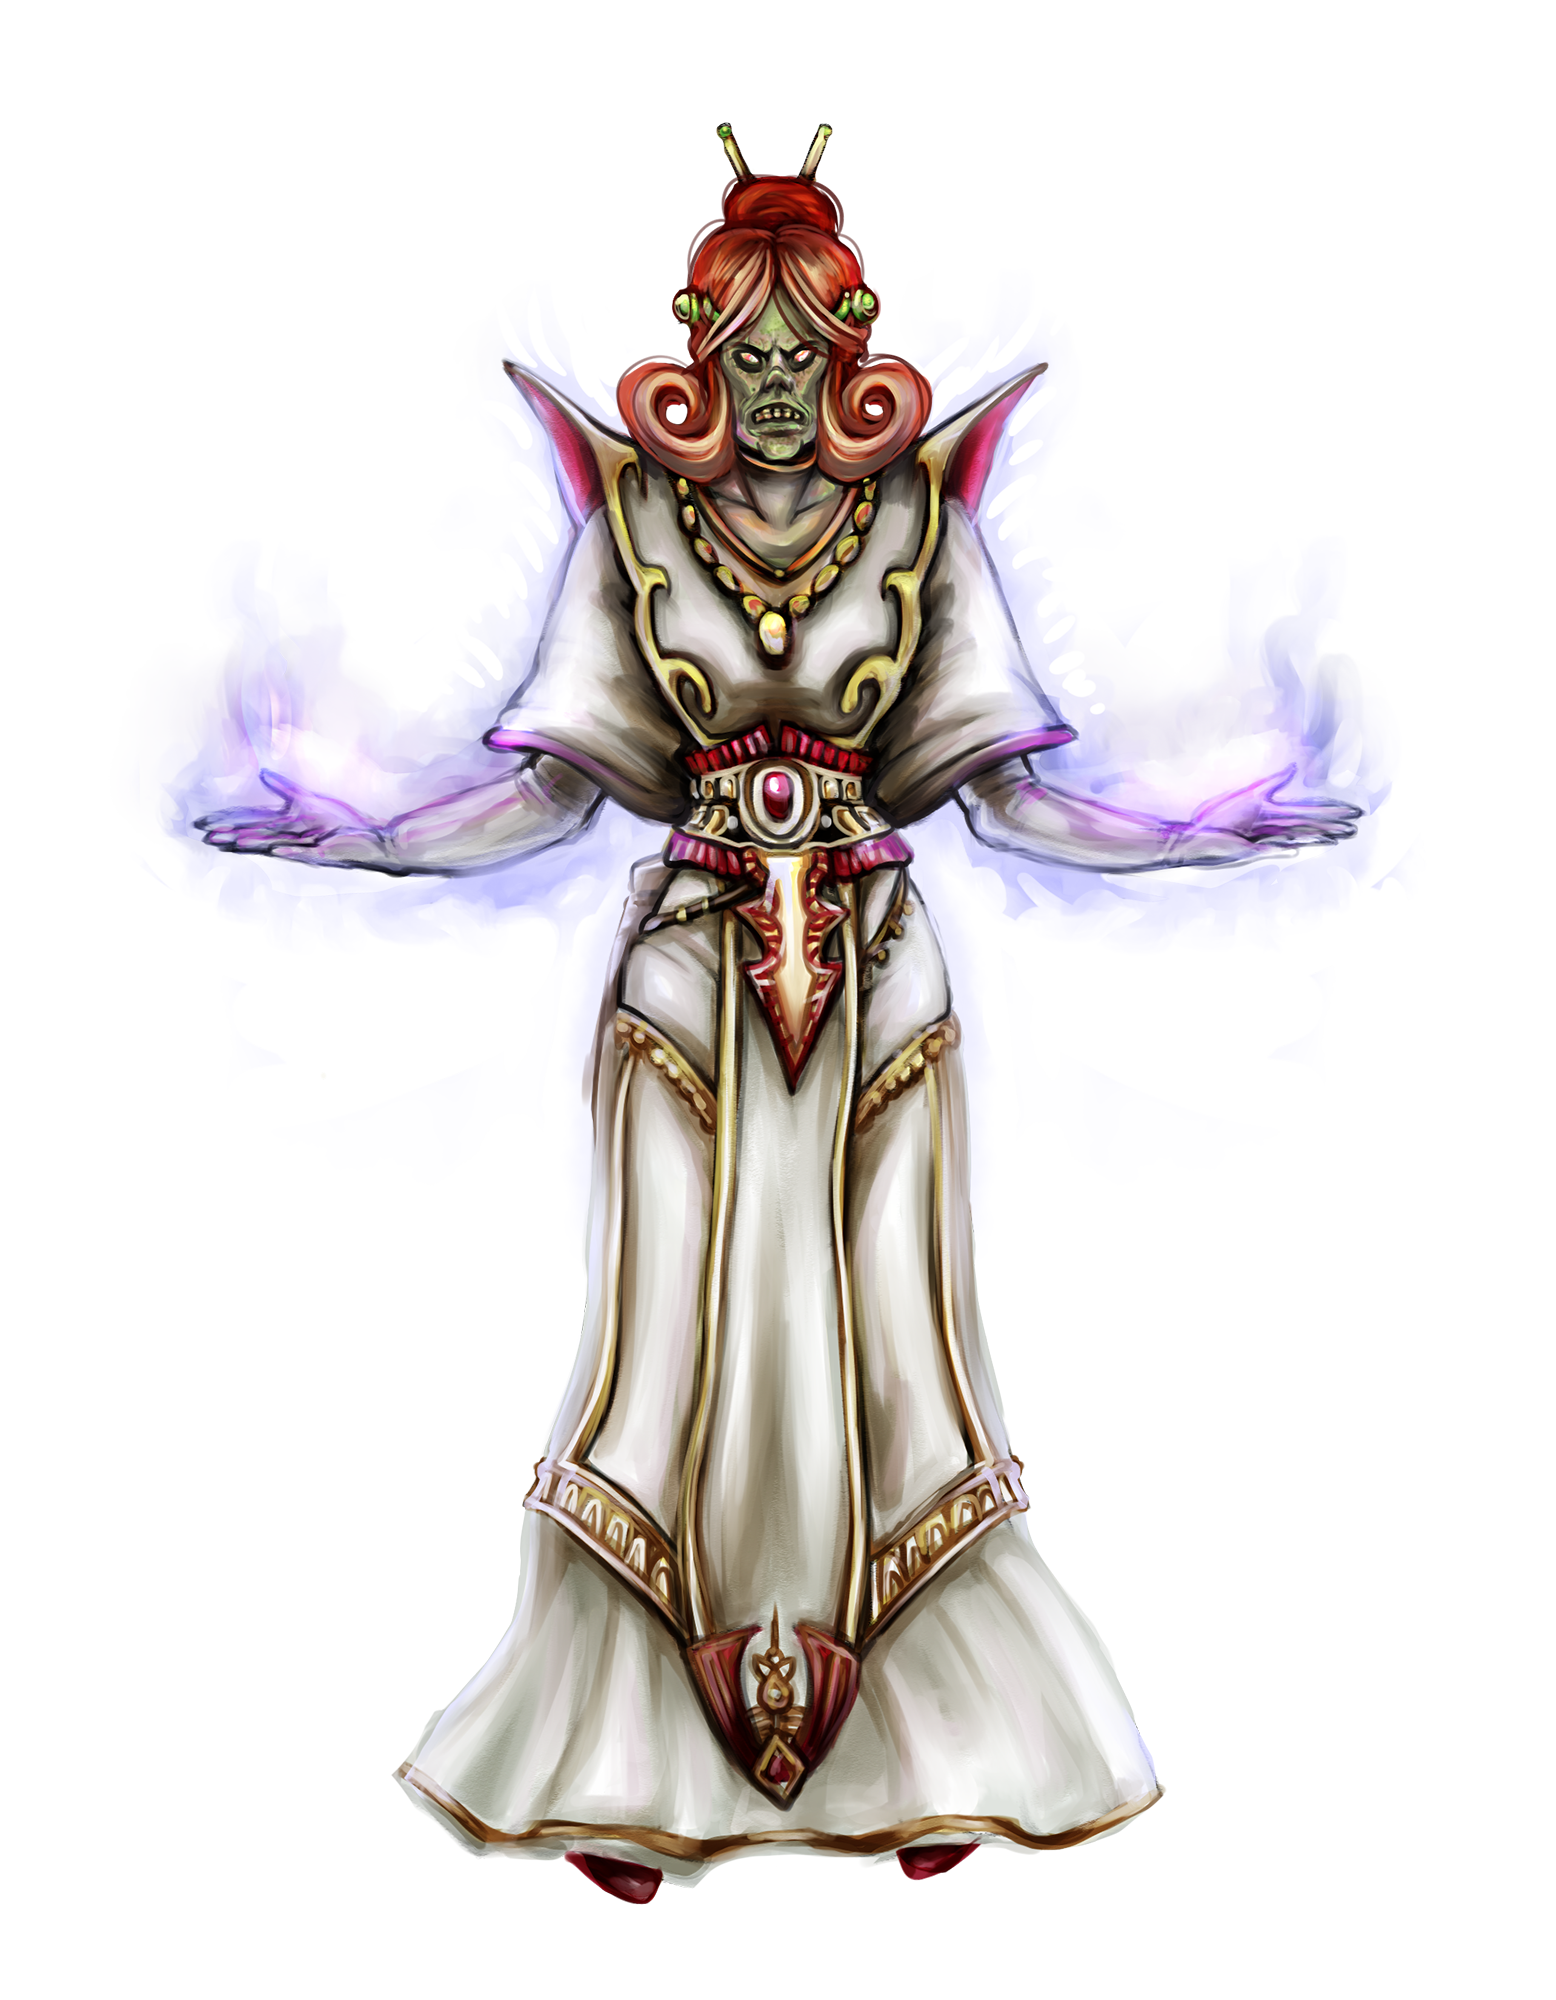 A female spellcaster dressed in expensive white and gold robes.